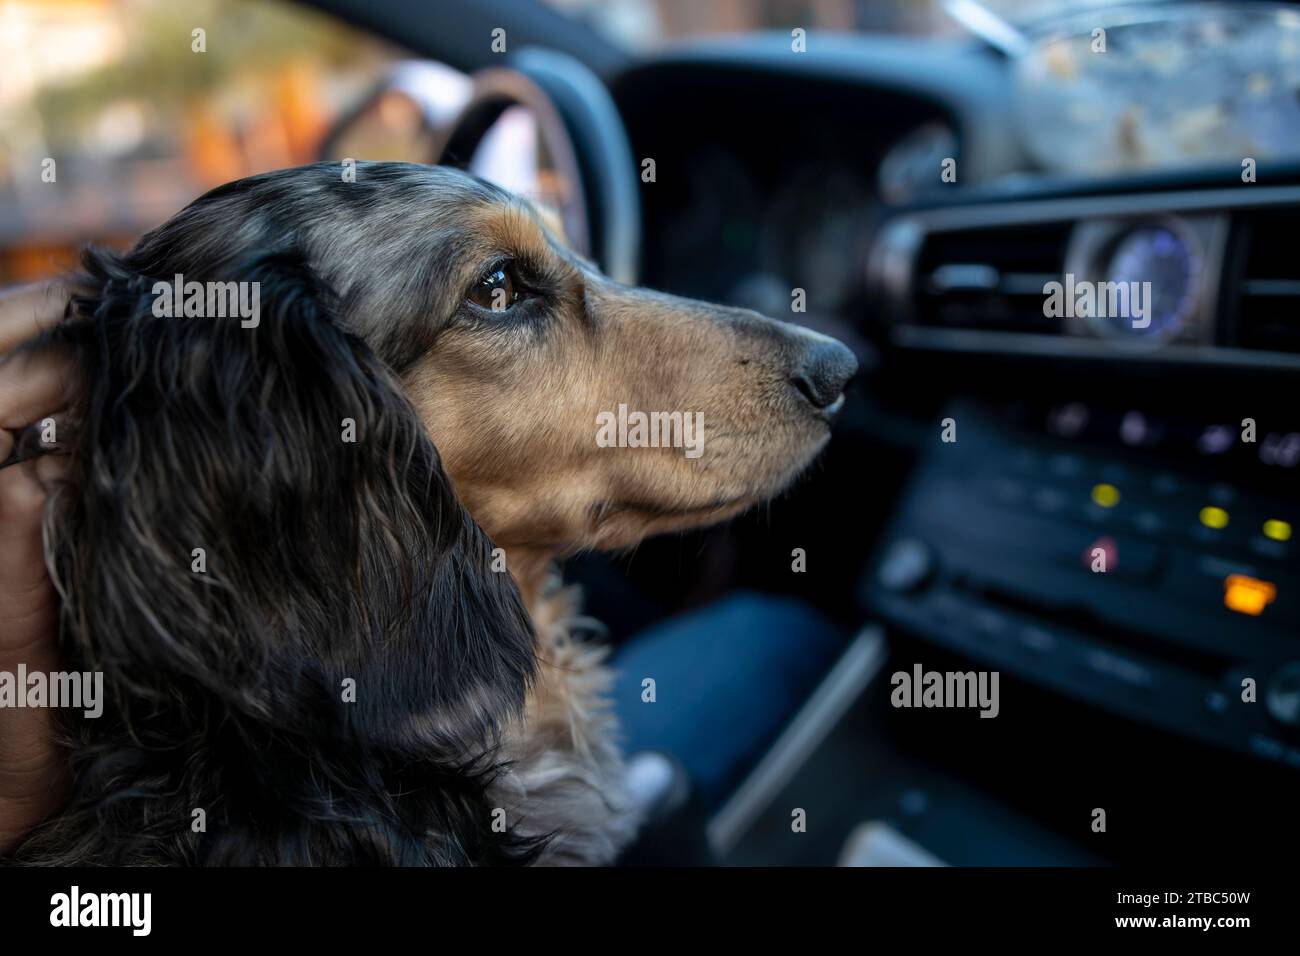 Long haired Dapple Dachshund riding in the front seat of a car. Stock Photo